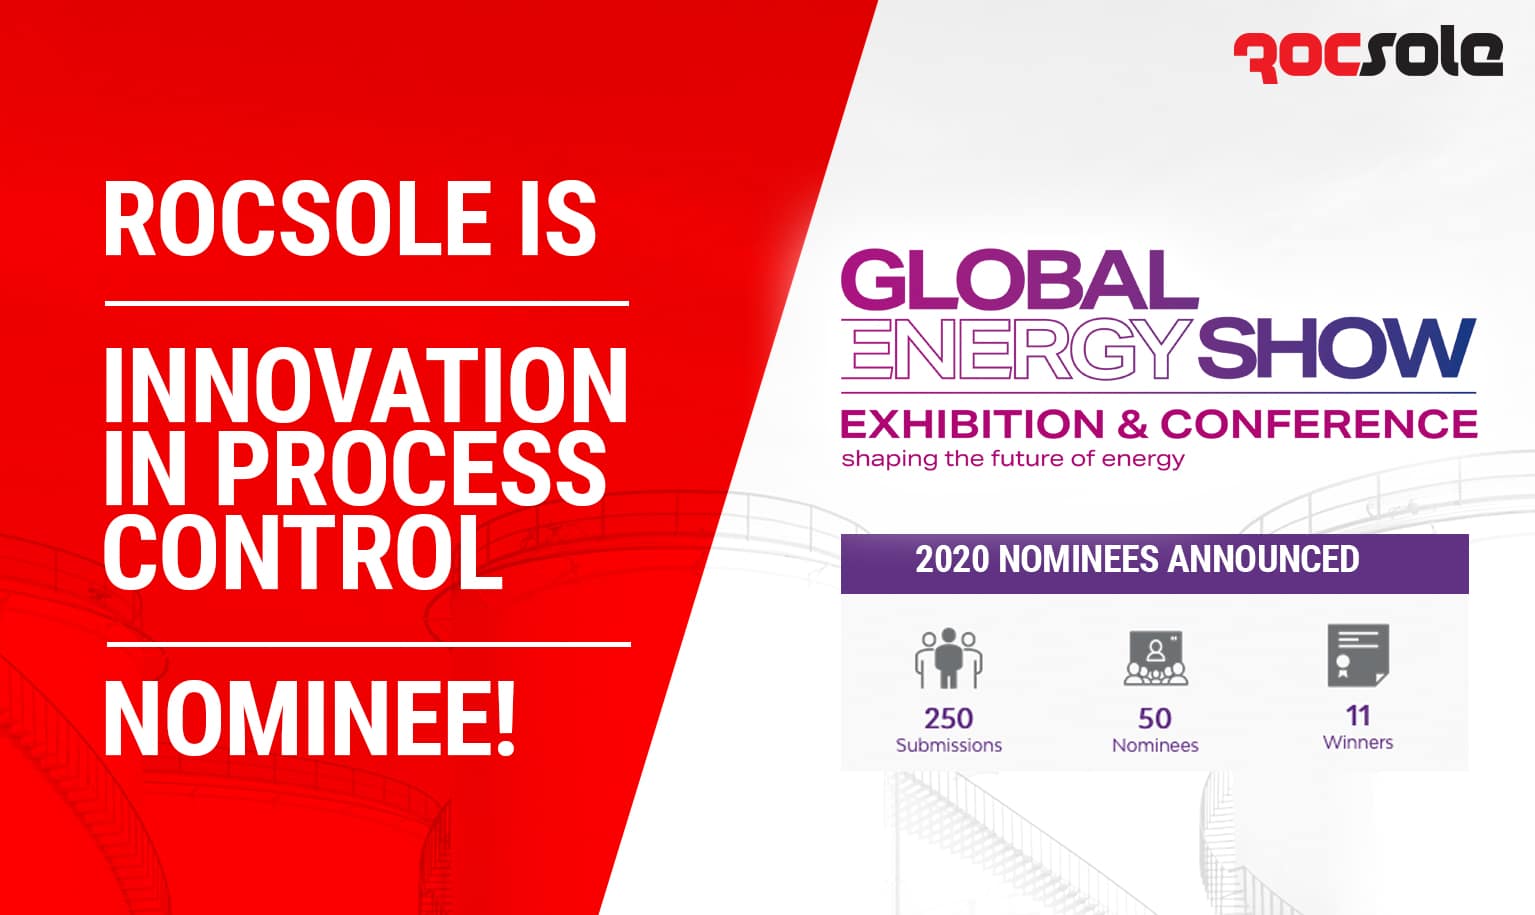 Rocsole Nominated at the Global Energy Awards